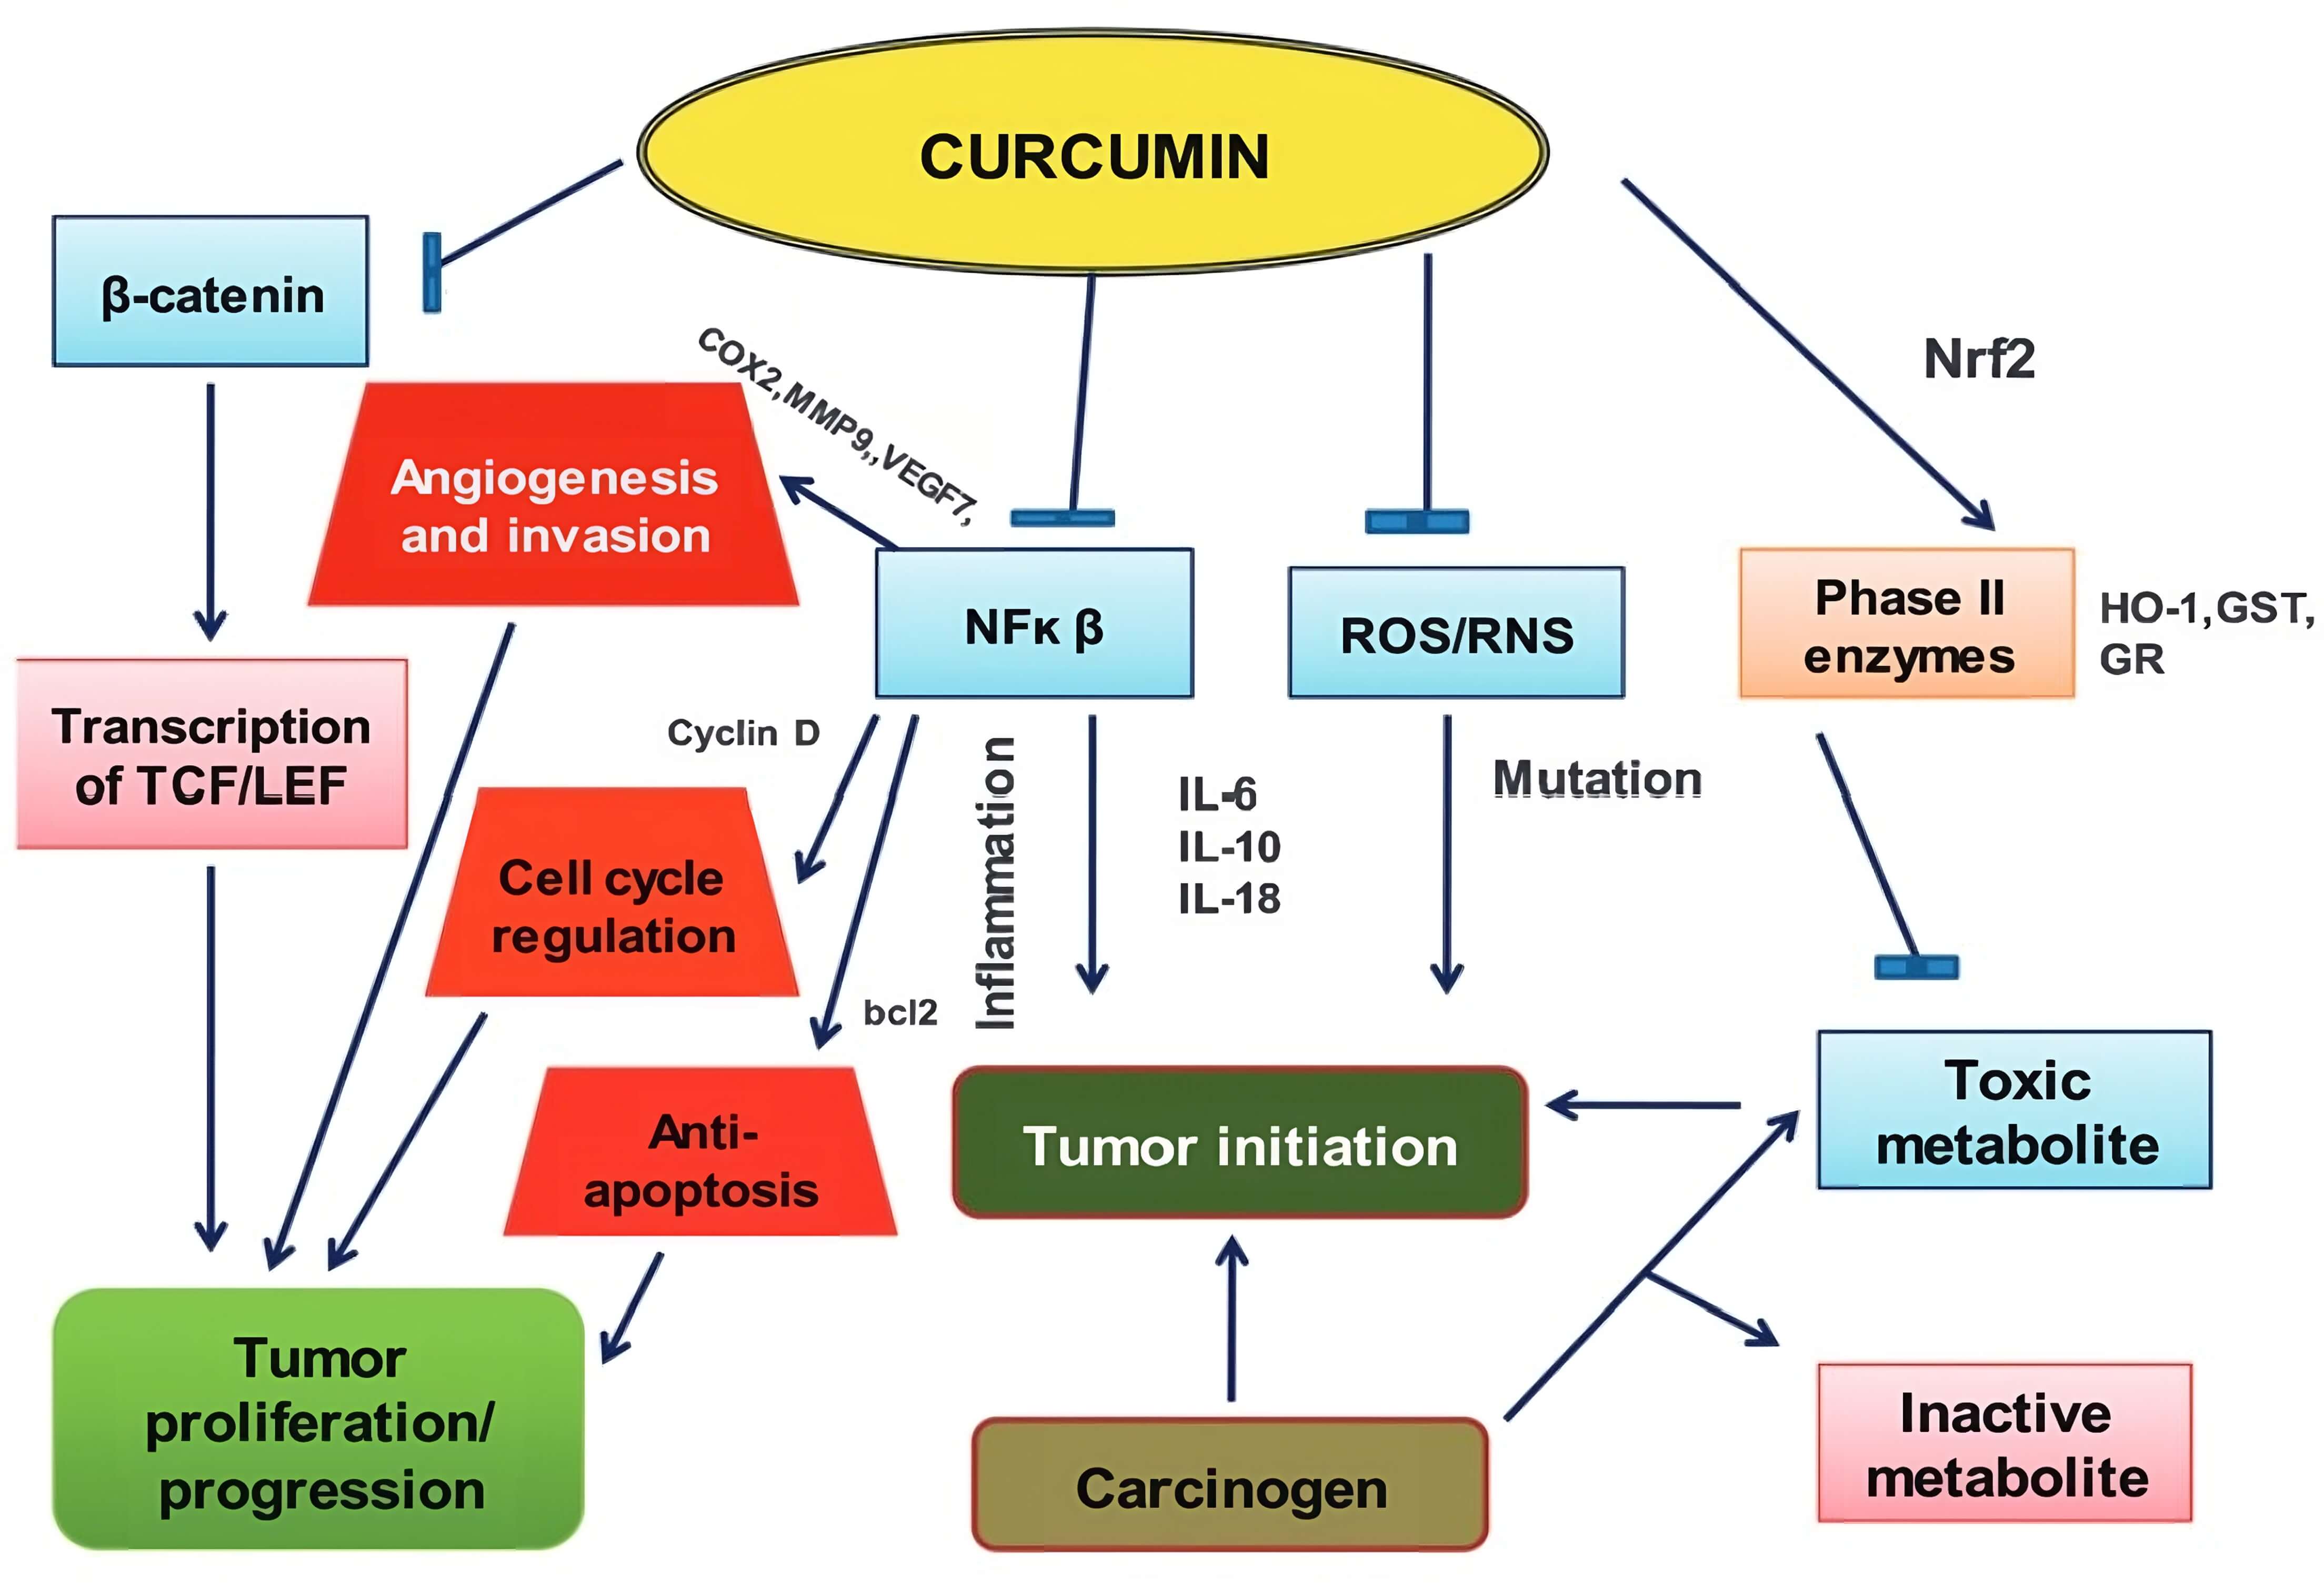 The impact of curcumin on breast cancer.